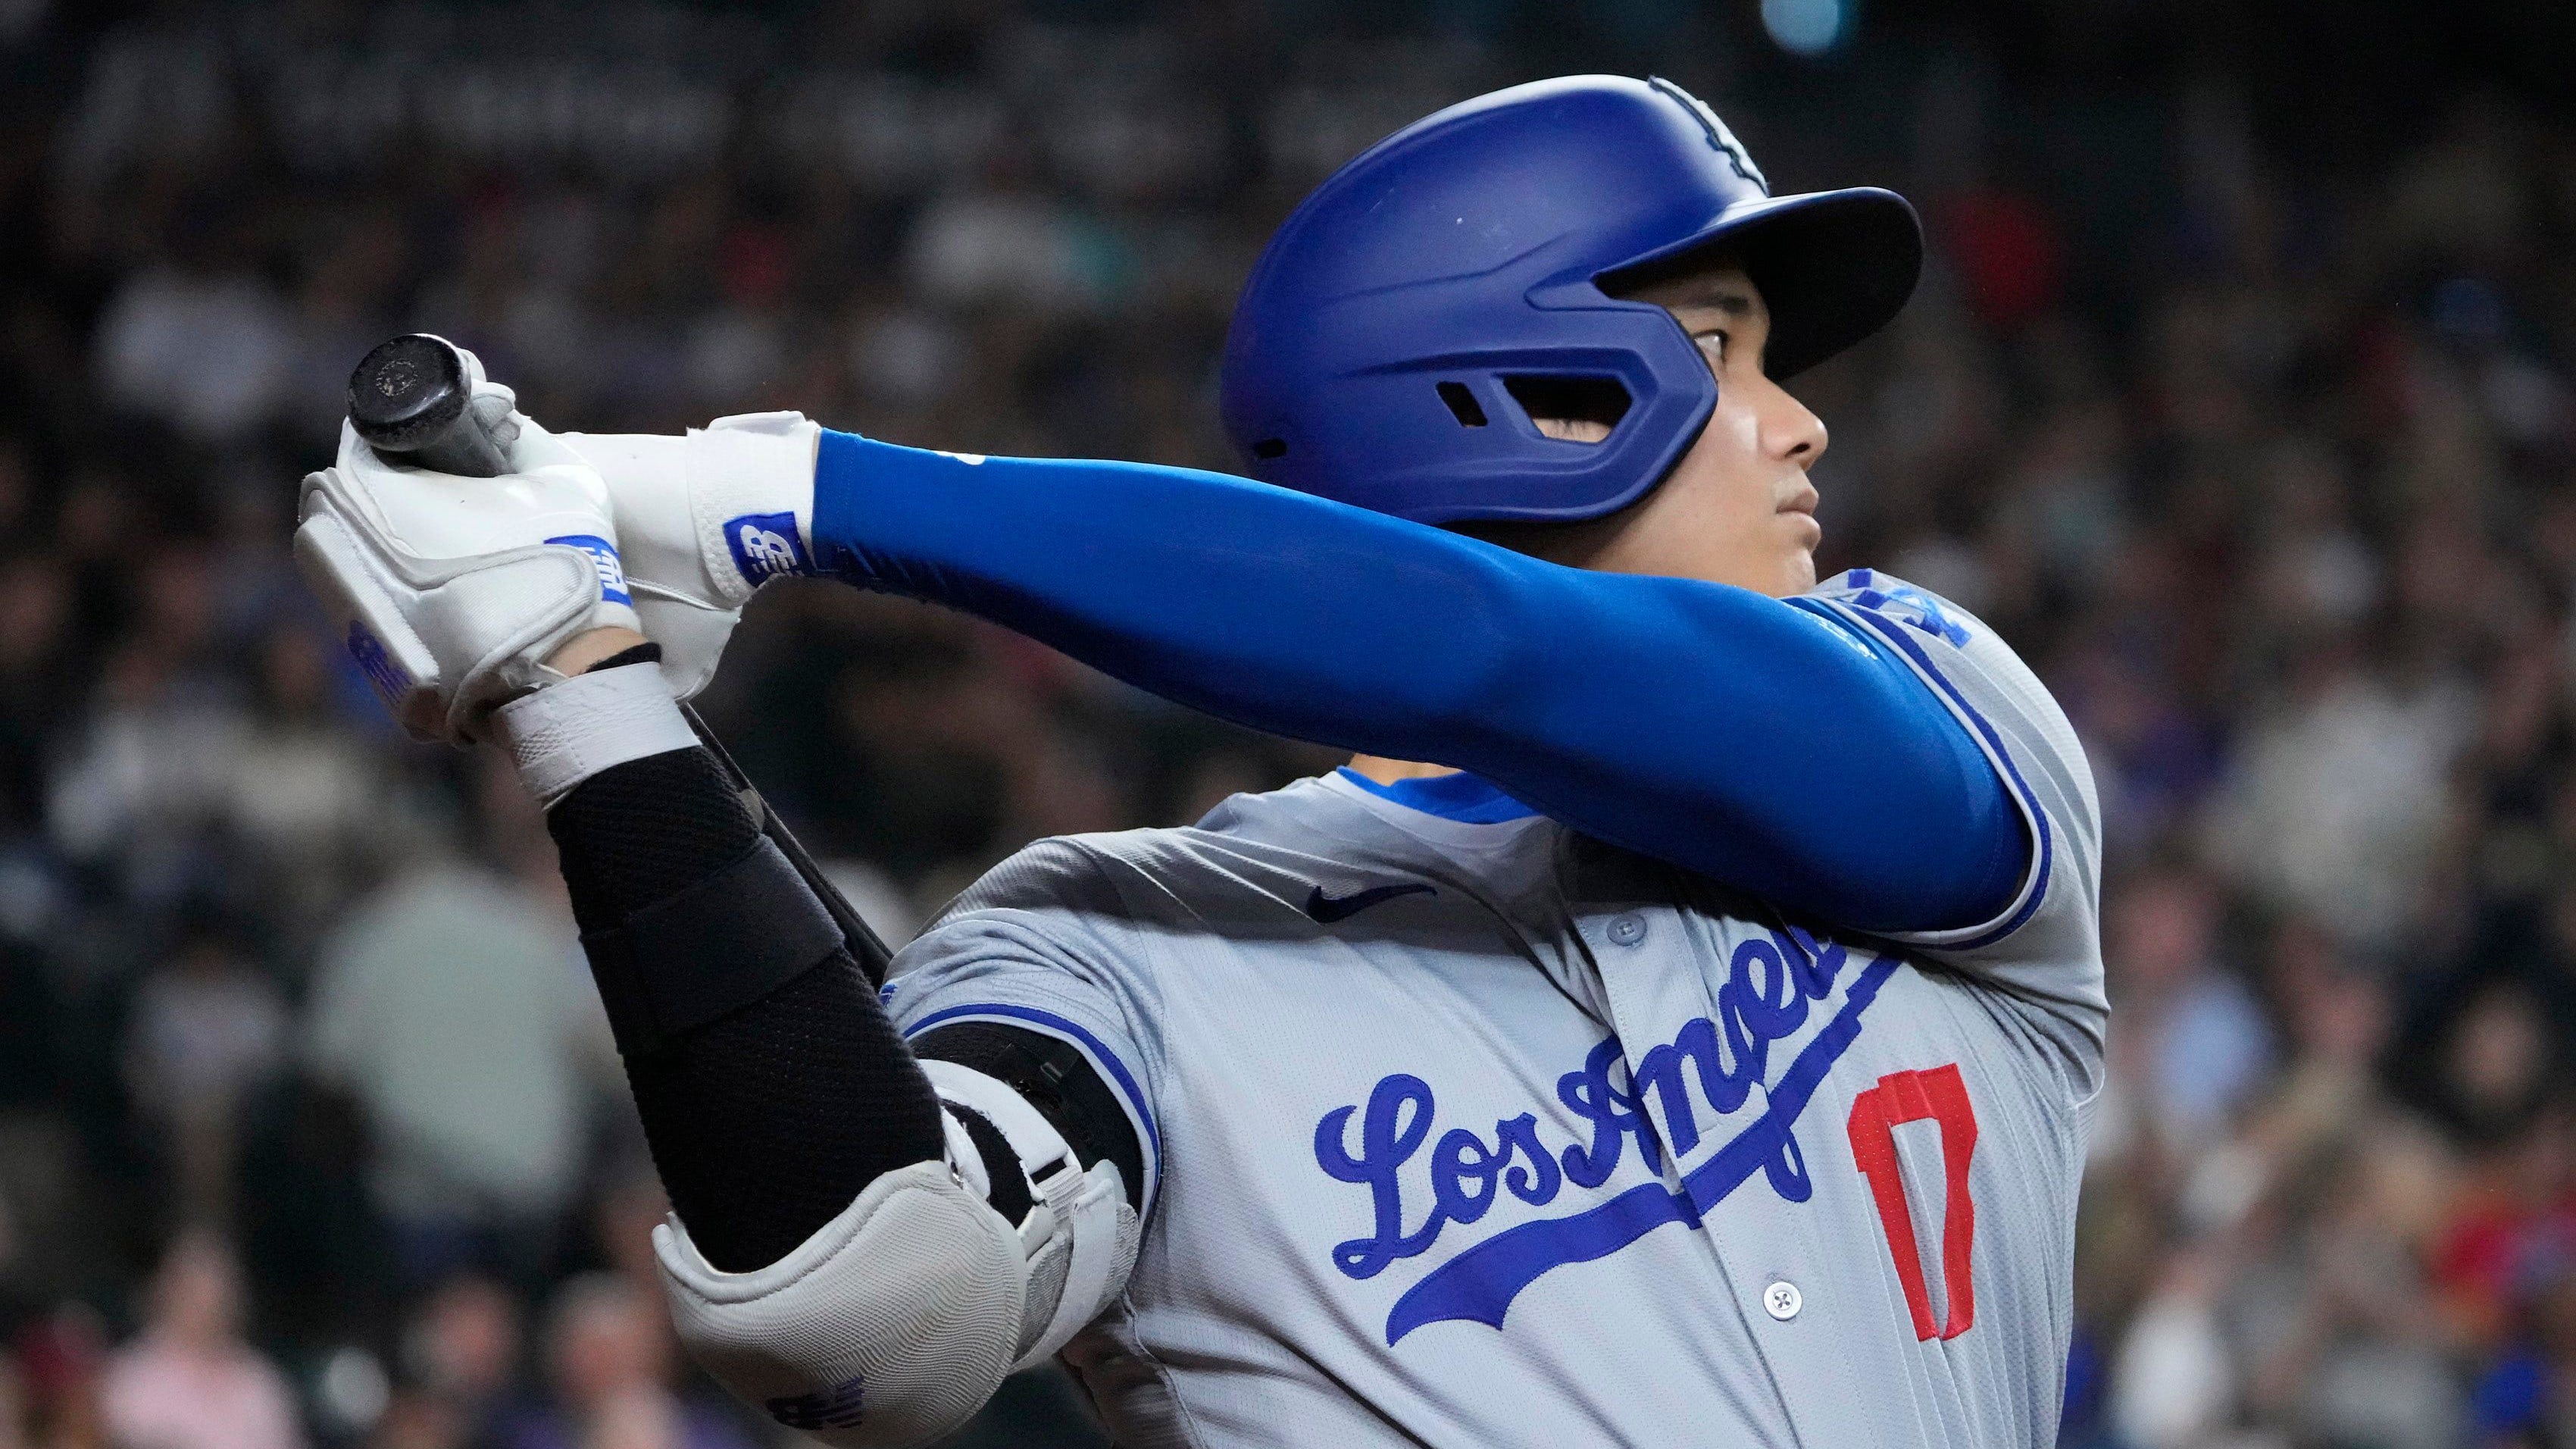 Los Angeles Dodgers' Shohei Ohtani (17) takes practice swings before batting against the Arizona